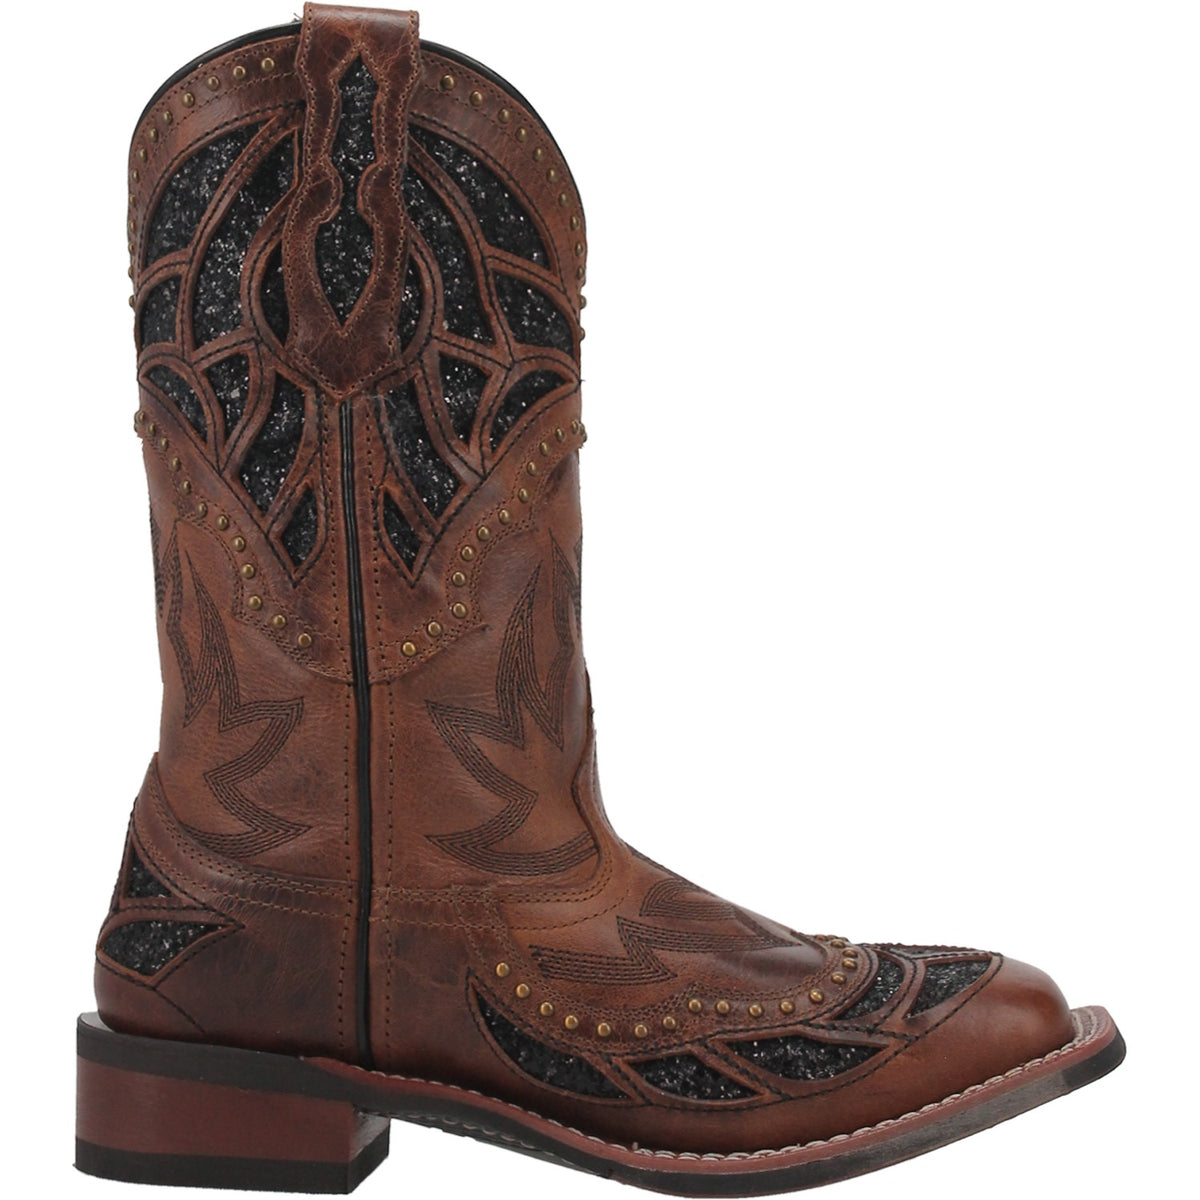 ETERNITY LEATHER BOOT Cover